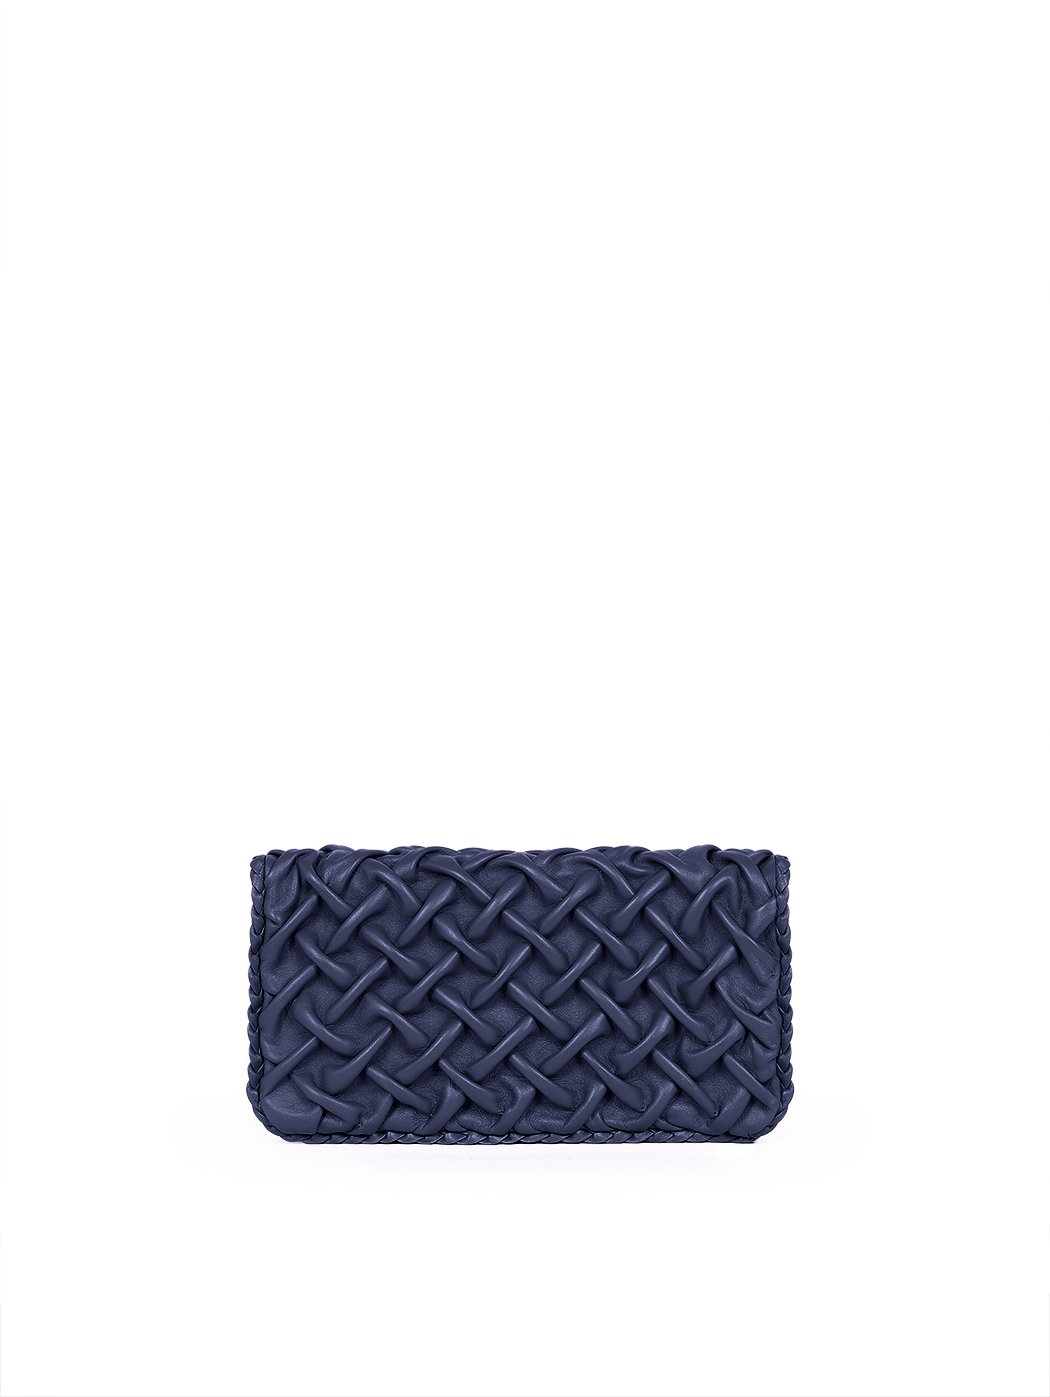 Foldover Crossbody Quilted Weave Clutch Blue